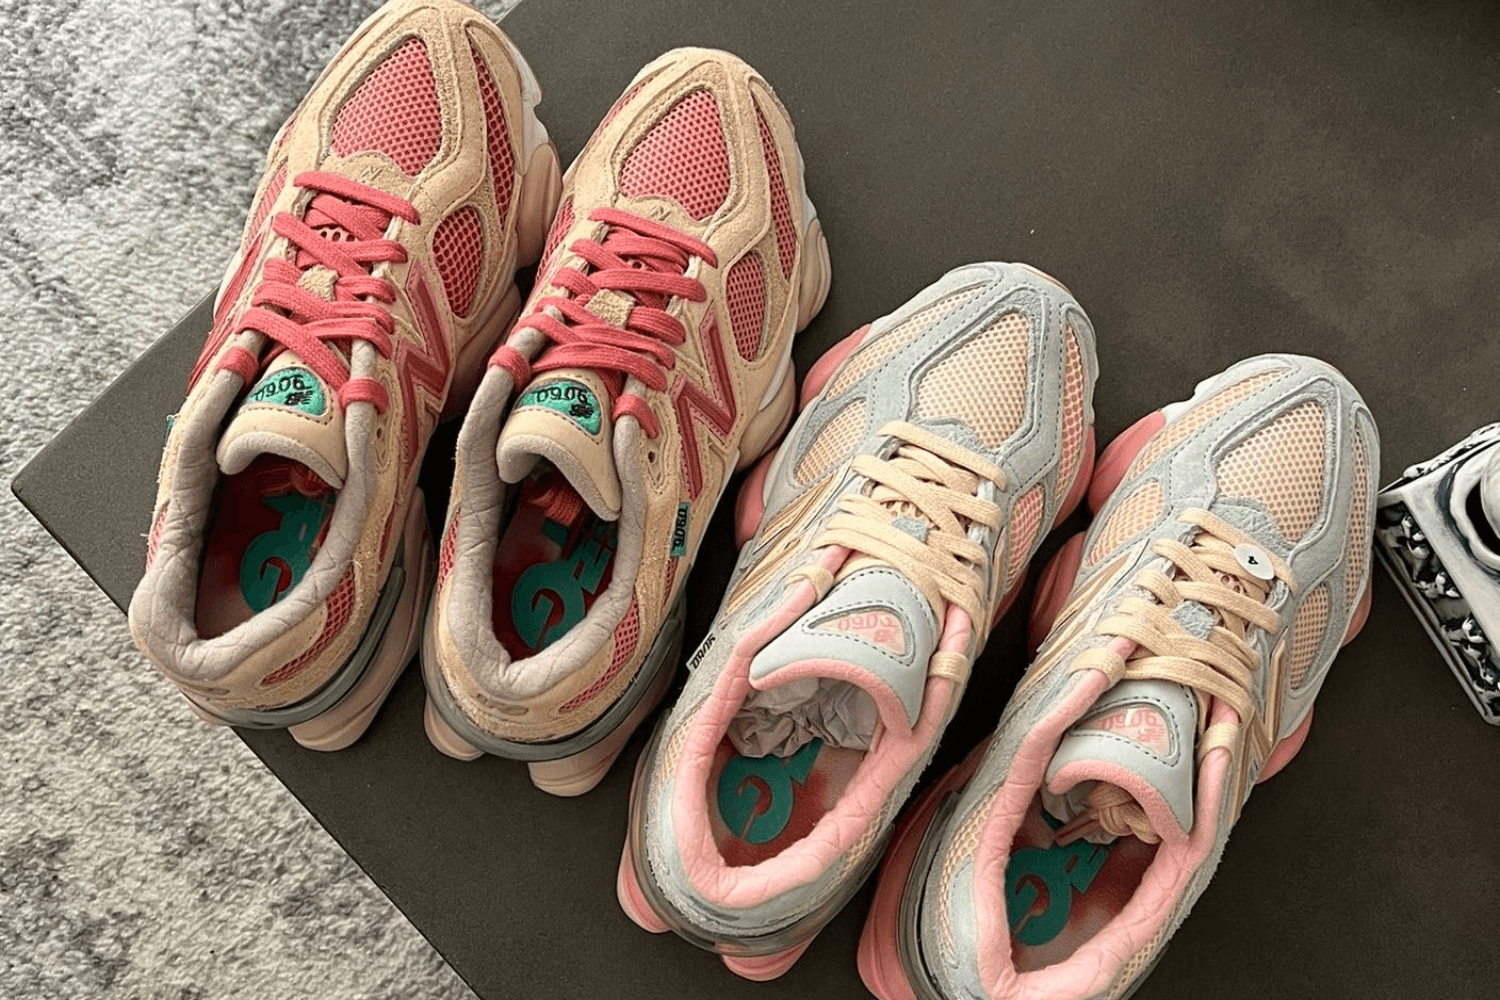 Raffle Joe Freshgoods x New Balance 9060 &#8216;Inside Voices&#8217; in Chicago is geopend